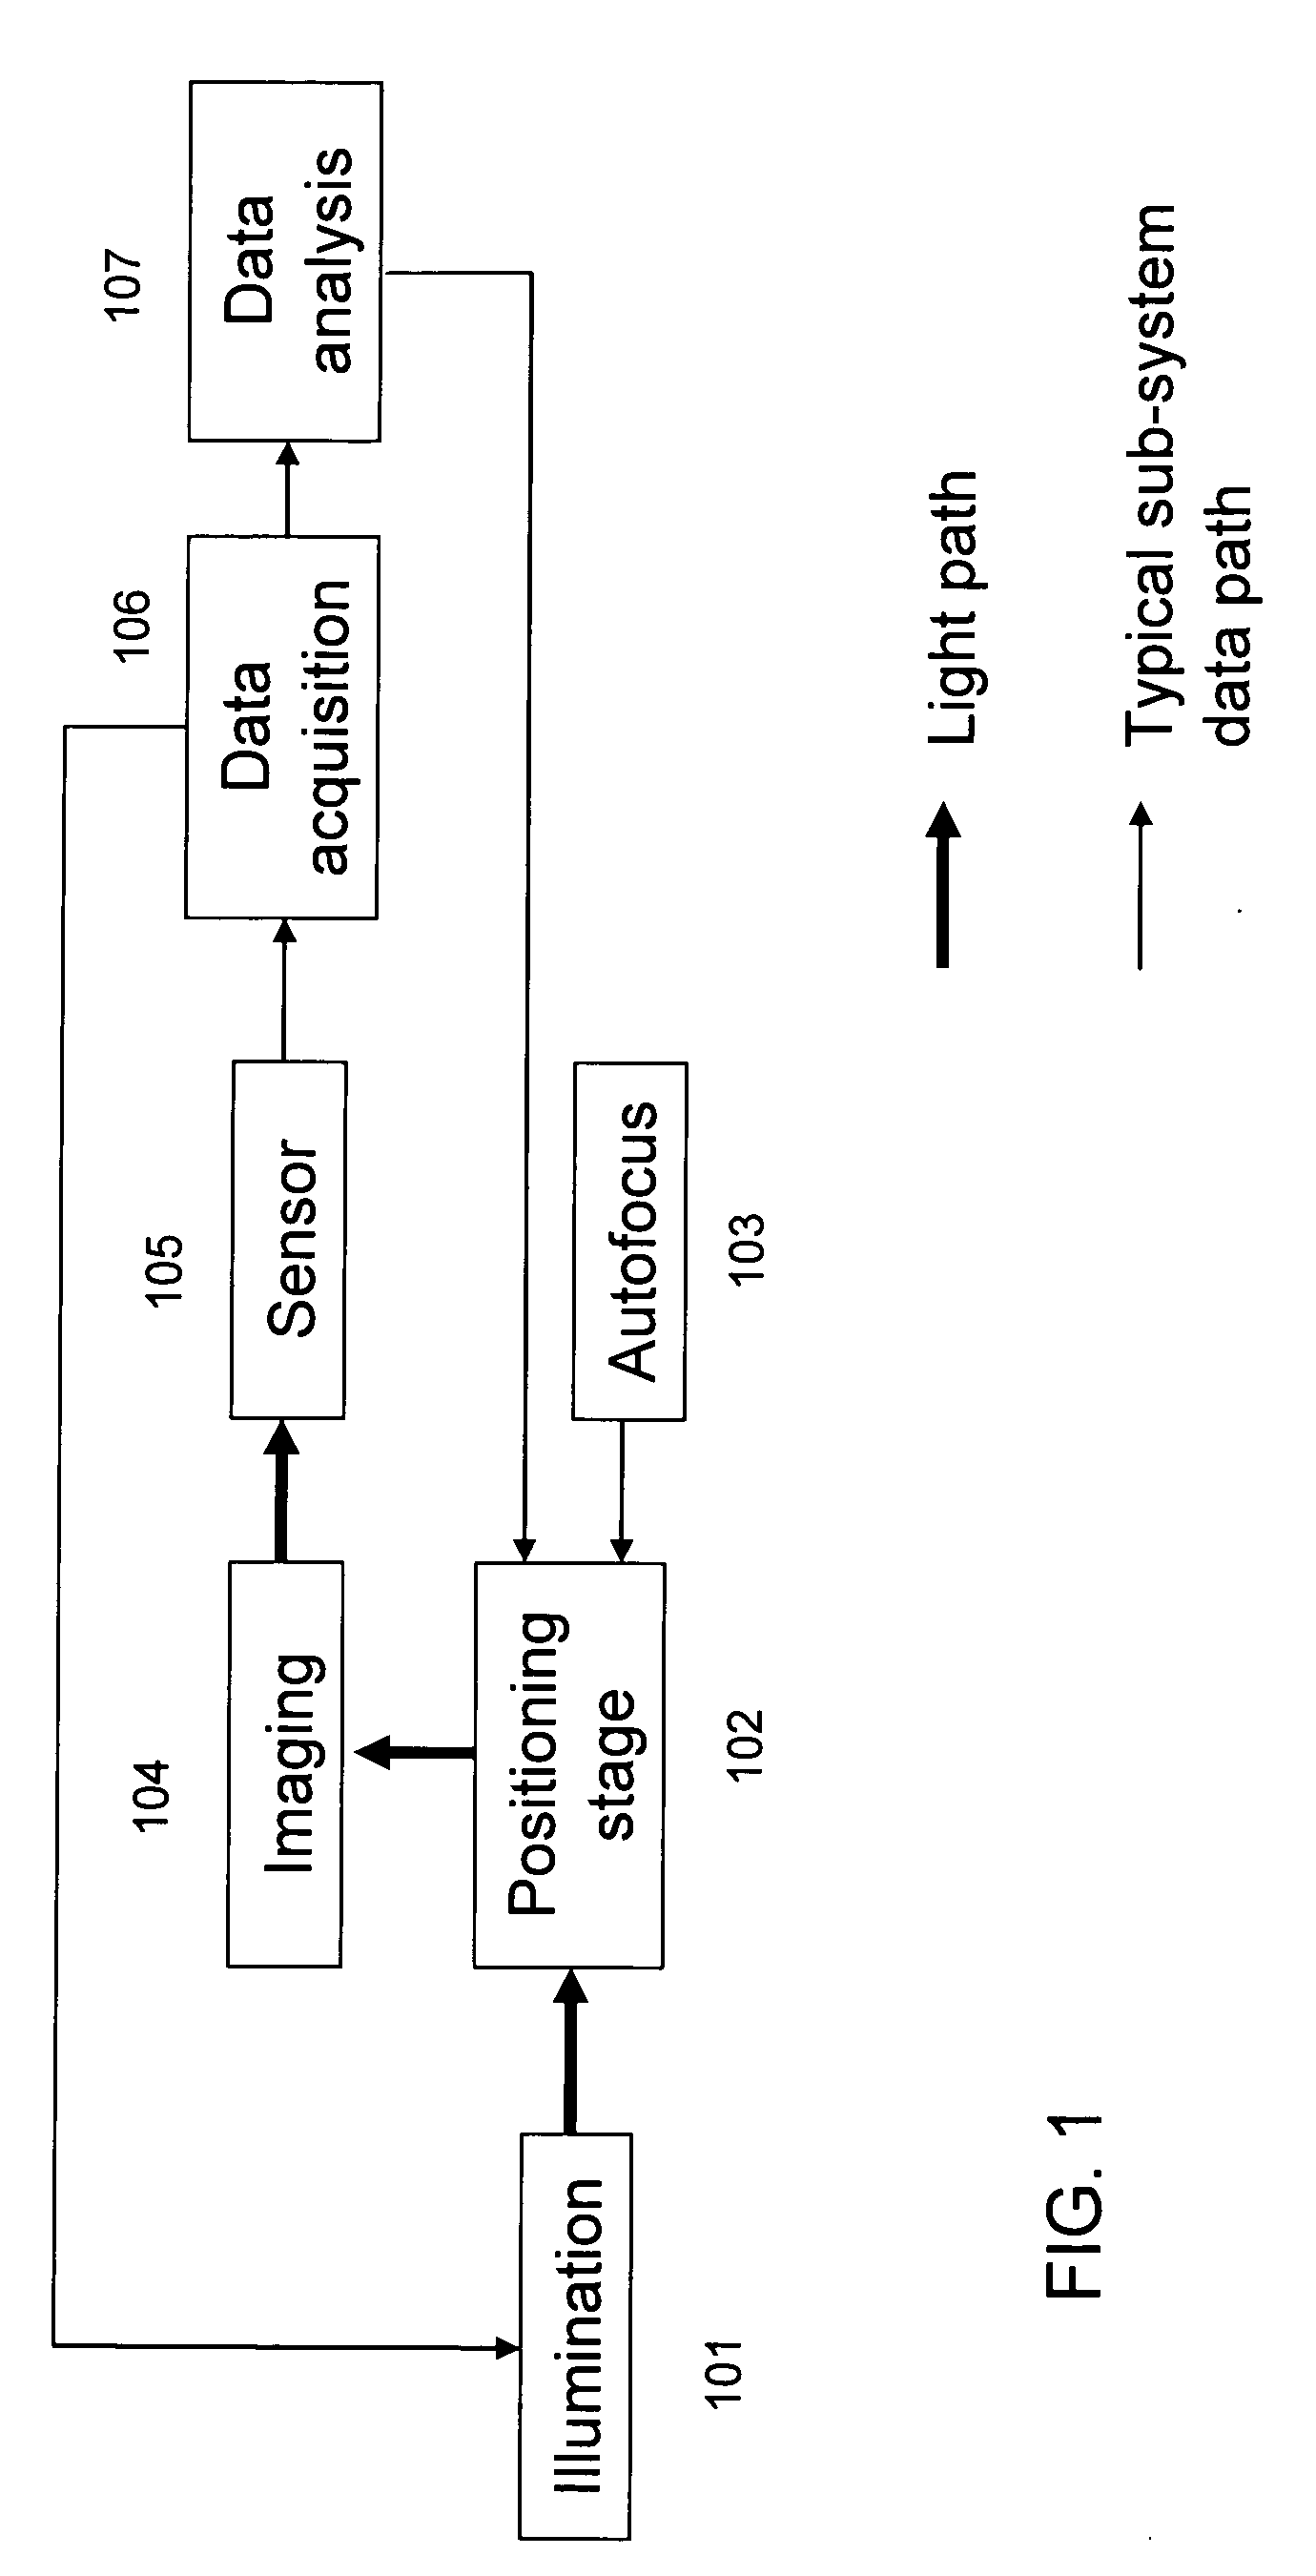 Split field inspection system using small catadioptric objectives